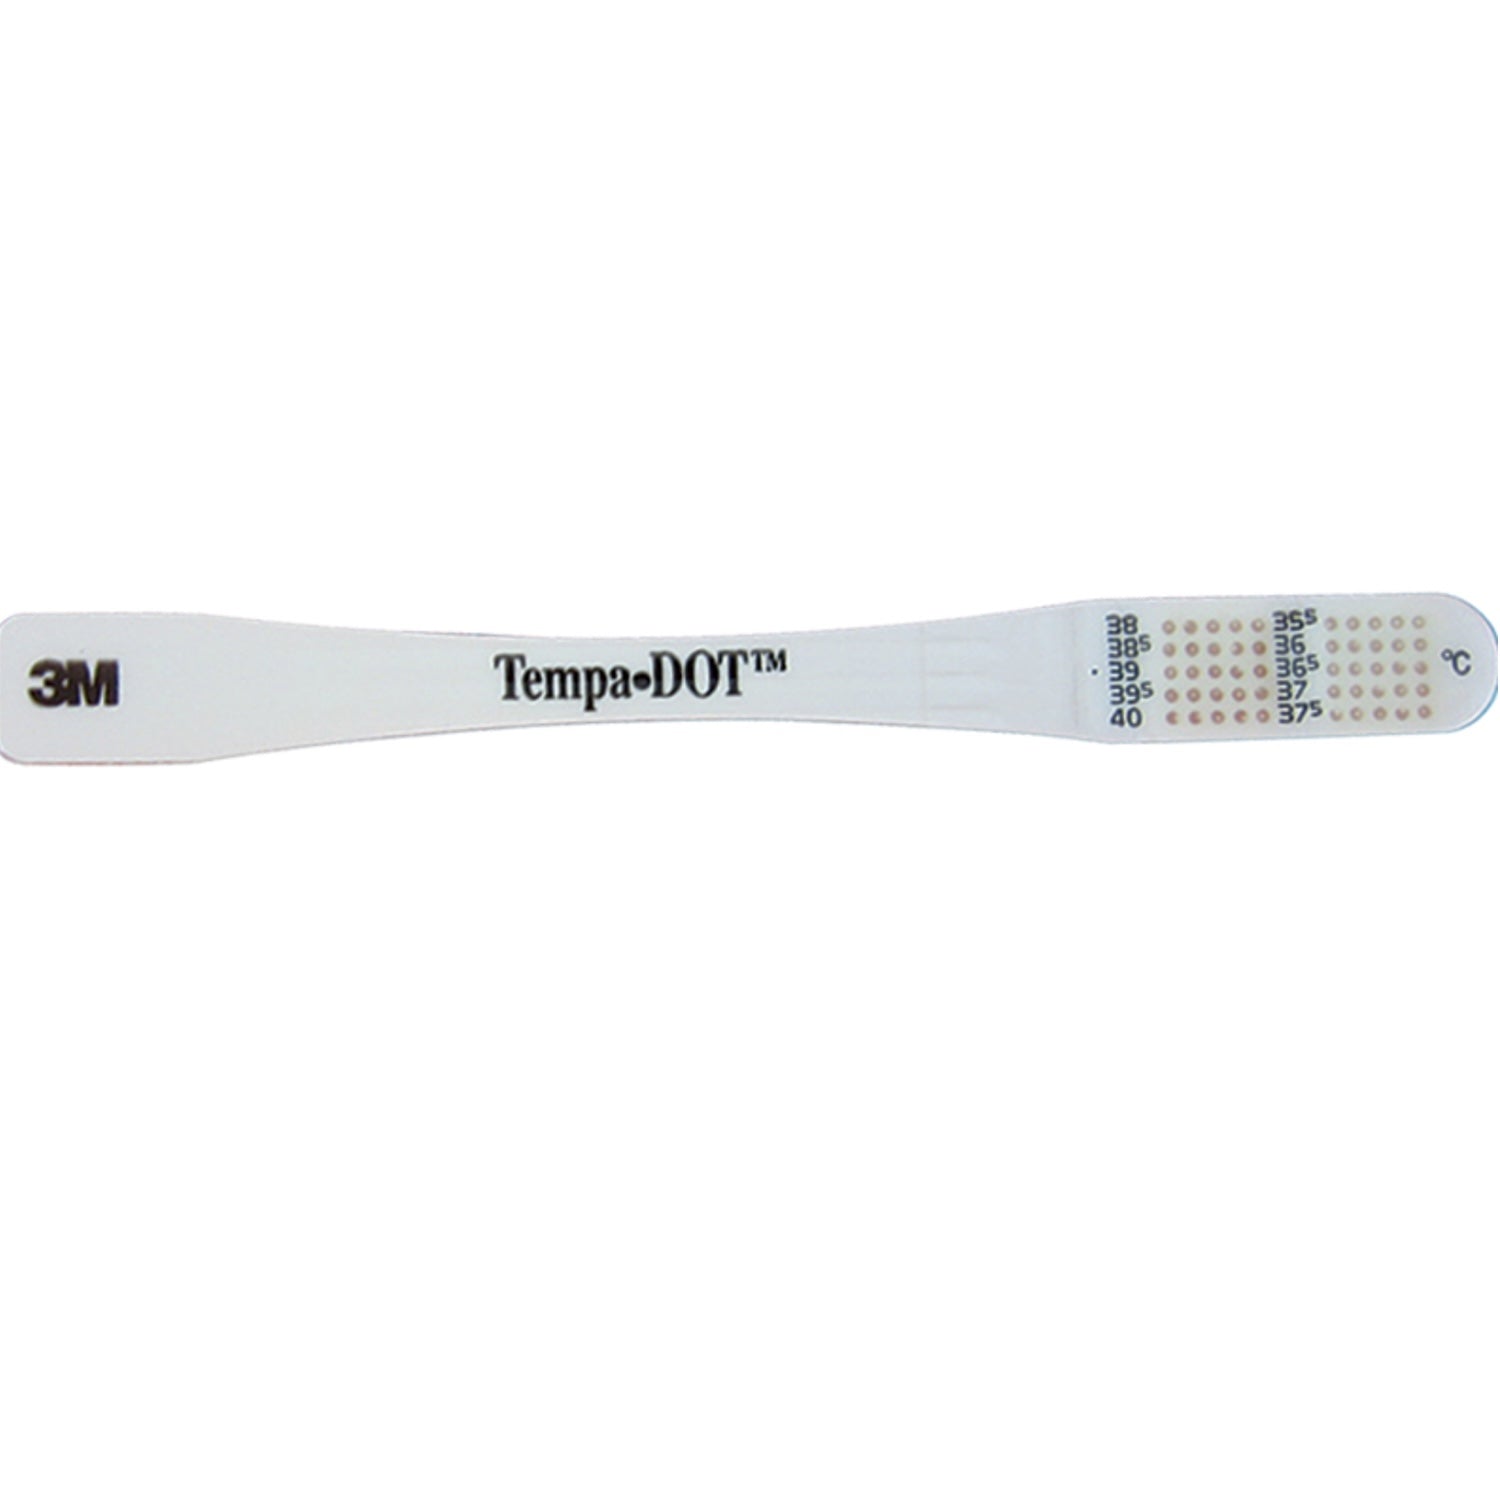 3M Tempadot Single Use Clinical Thermometer | Pack of 100 (4)